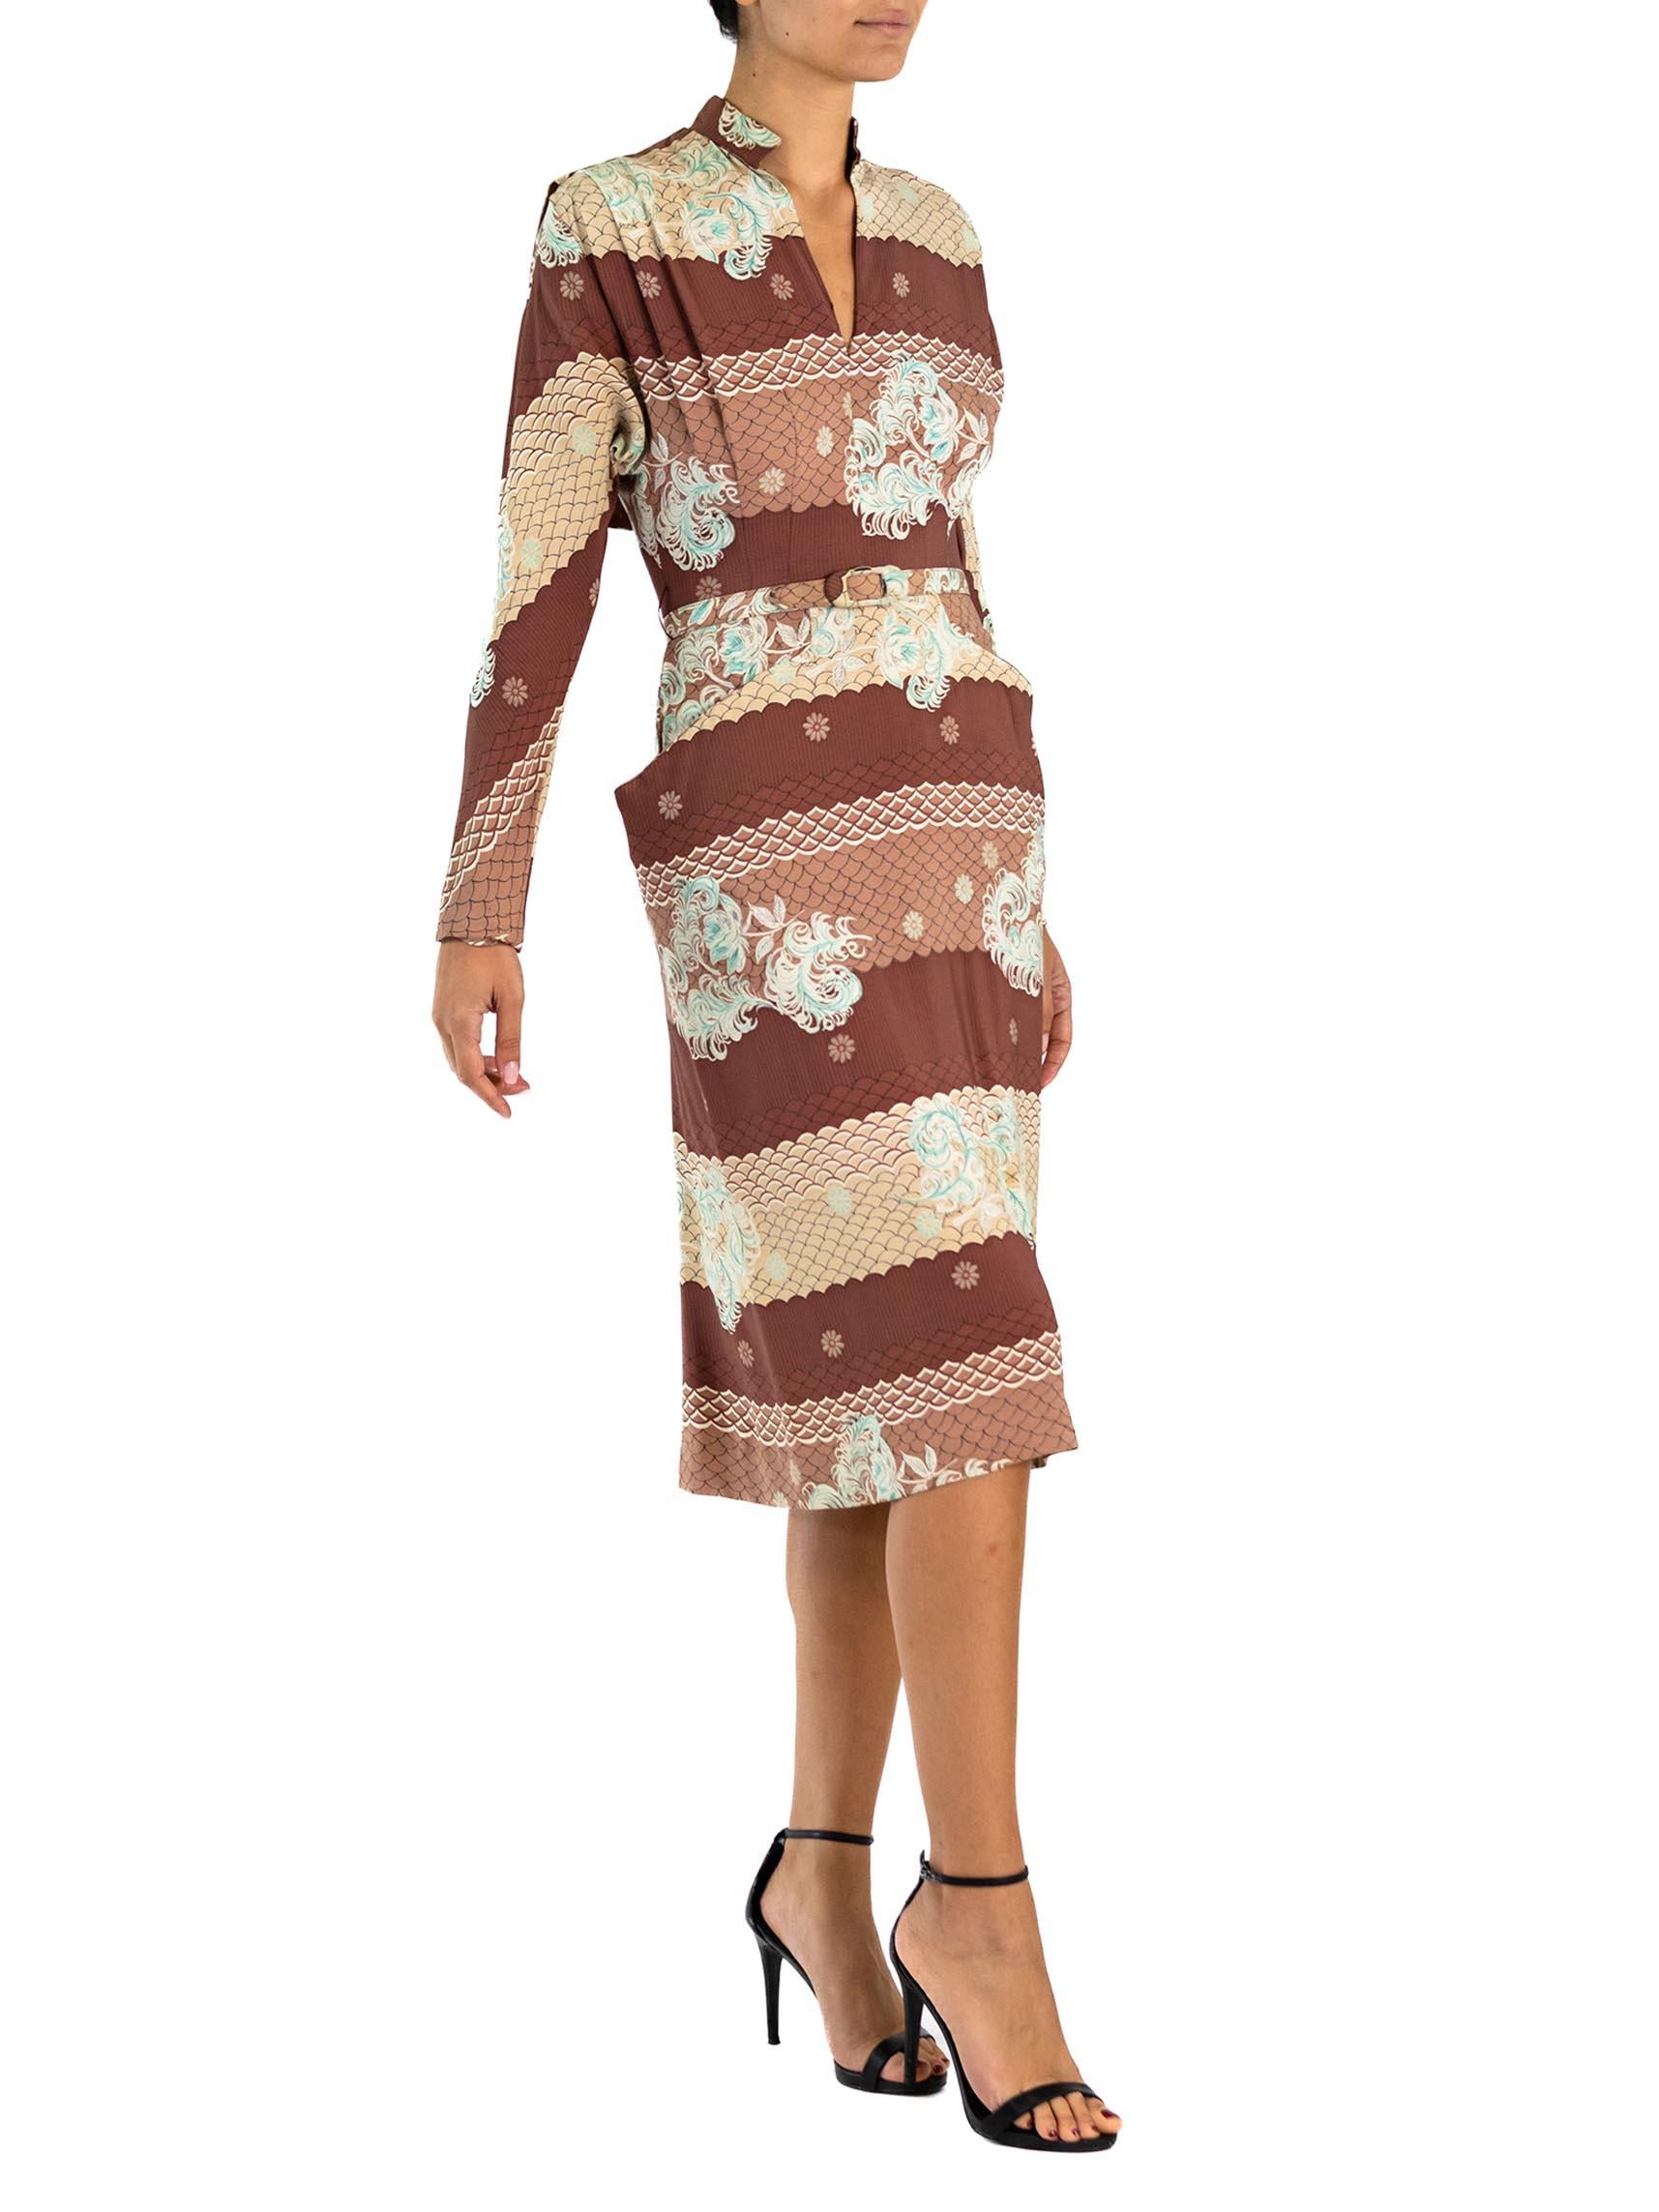 Women's 1940S Brown & Blue Cold Rayon Sophisticated Dress With Belt, Pockets Capelet For Sale